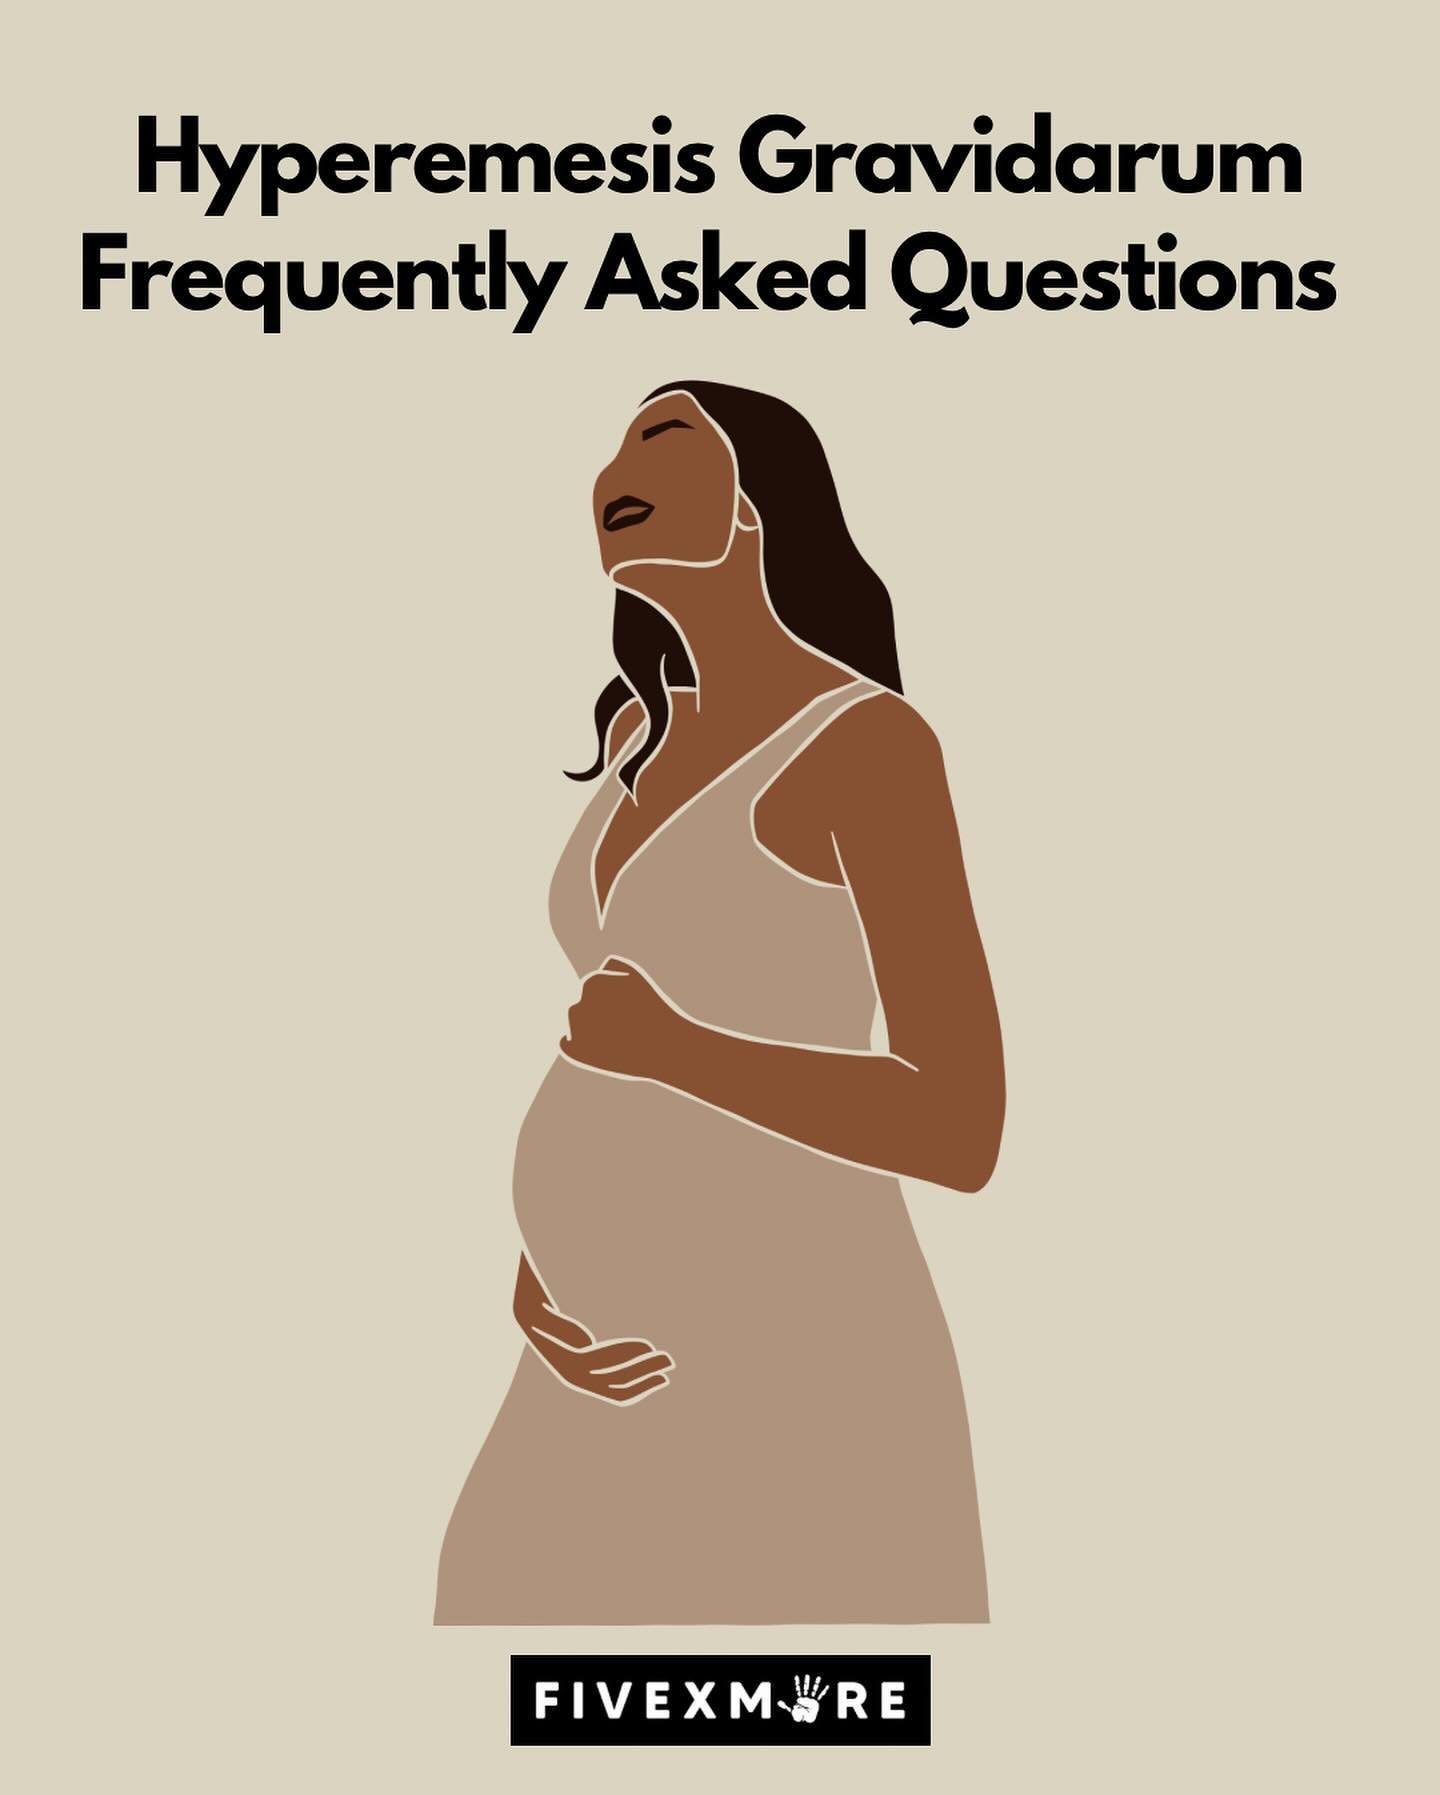 Let&rsquo;s take a deeper look at HG and answer some of the frequently asked questions we hear from women and birthing people. The information from this post is from @royalcollegeobsandgynae website,  #BMHAW24 #FiveXMore